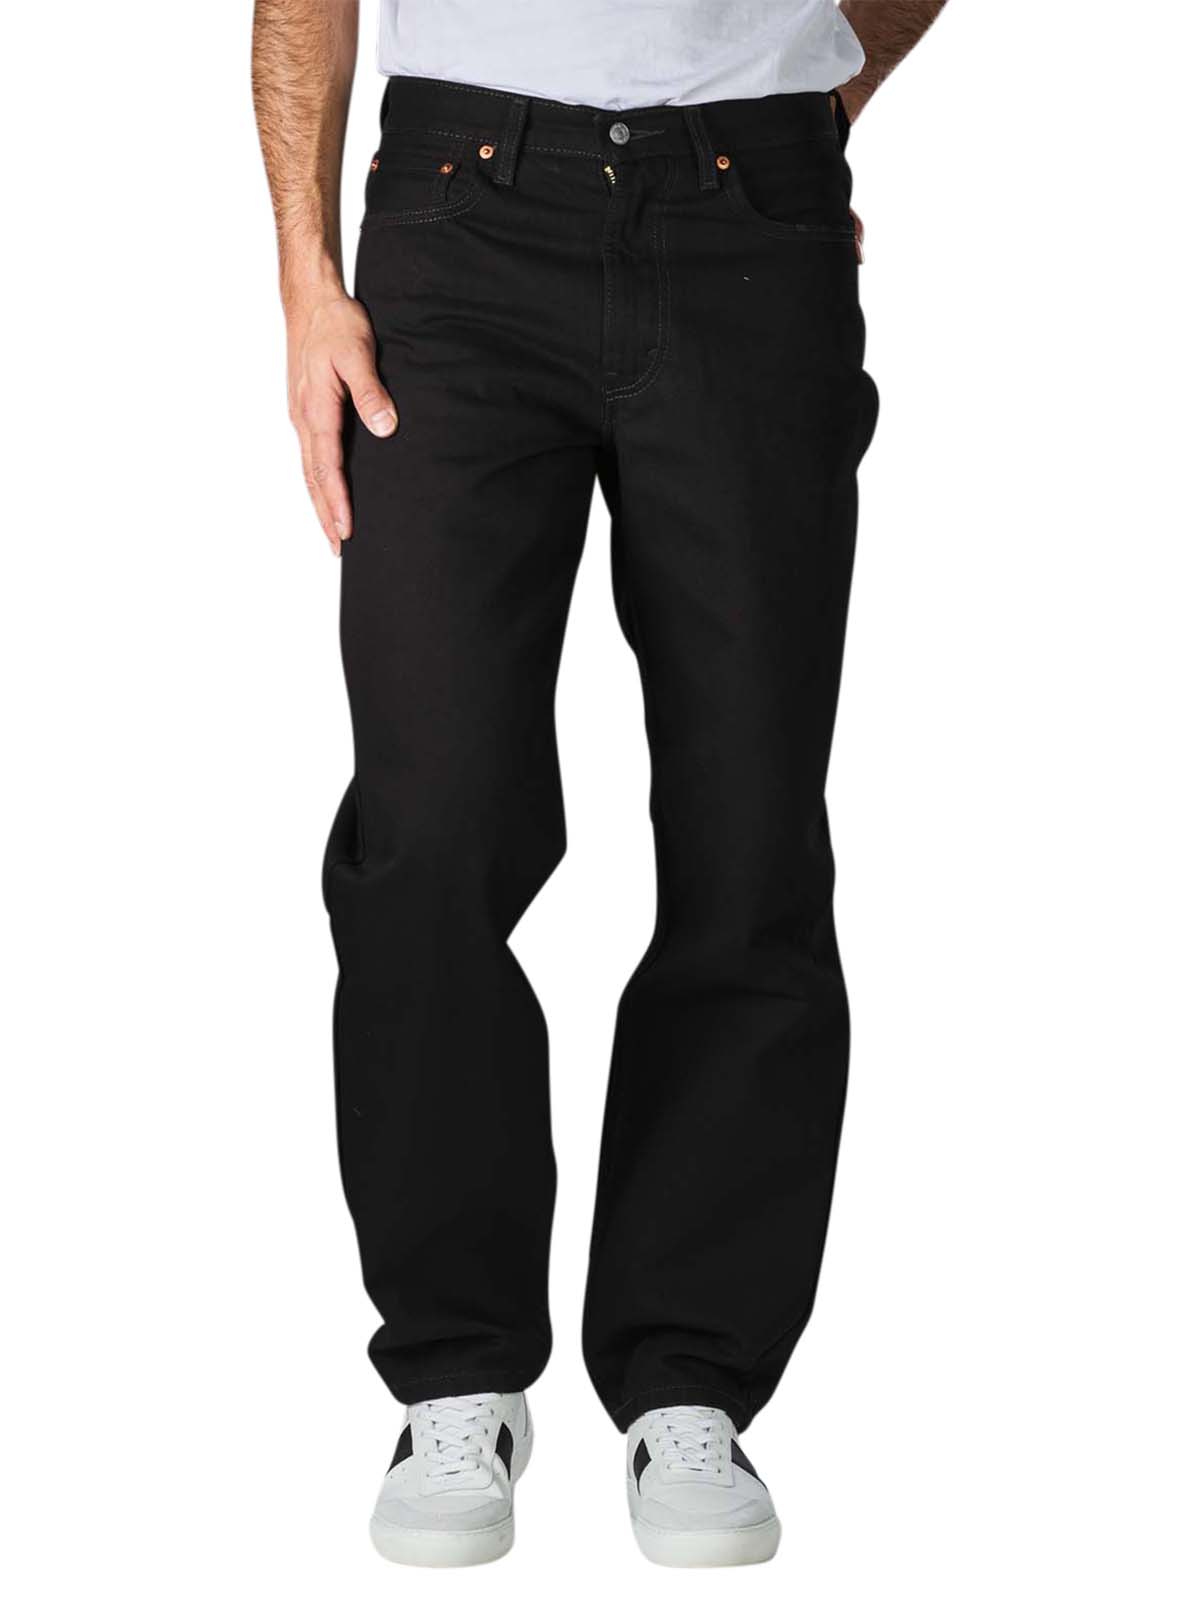 Levi's 550 Jeans Relaxed Fit black Levi's Men's Jeans | Free Shipping on   - SIMPLY LOOK GOOD